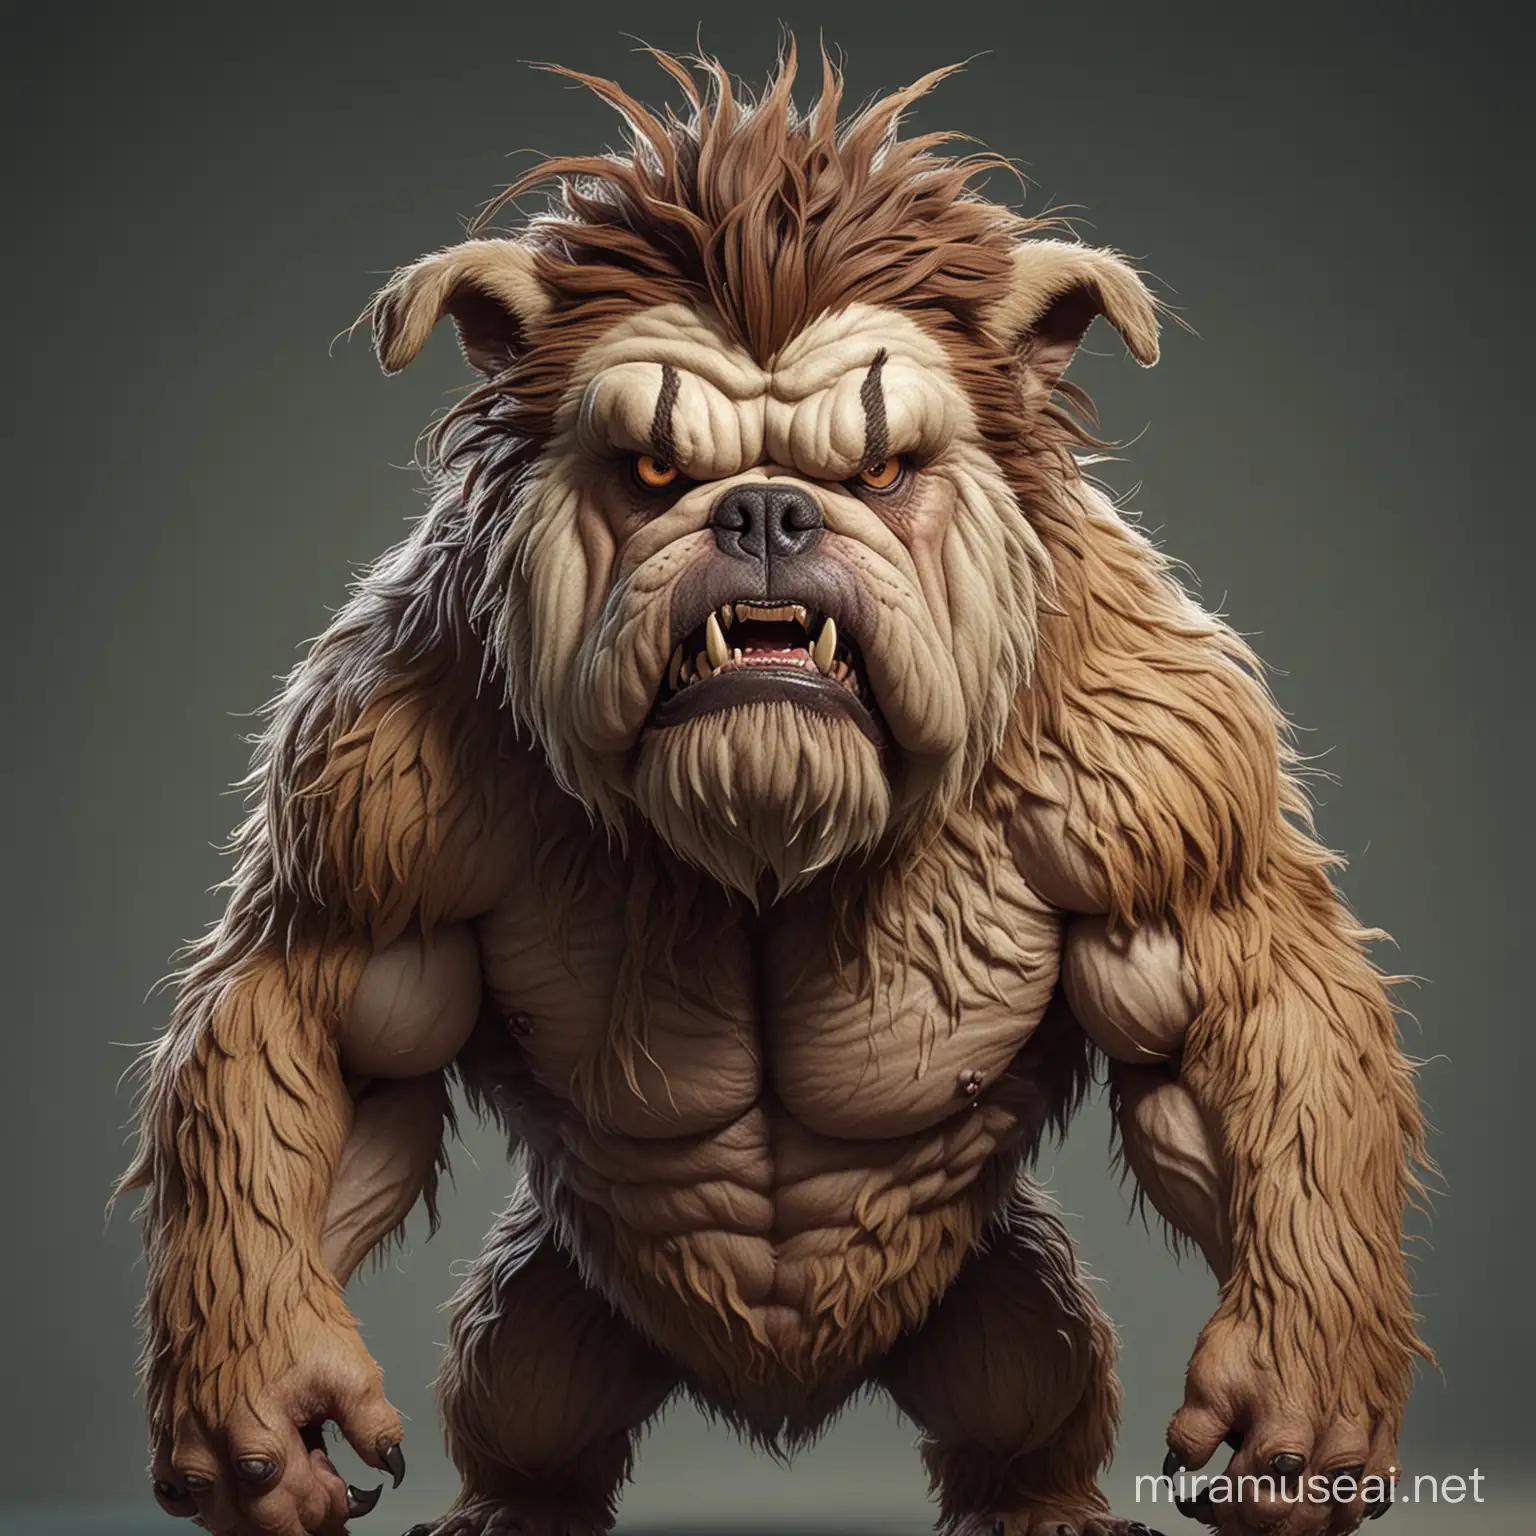 bulldog monster,hairy,gaint,concept art,body covered with hair,angry face expression,mutated